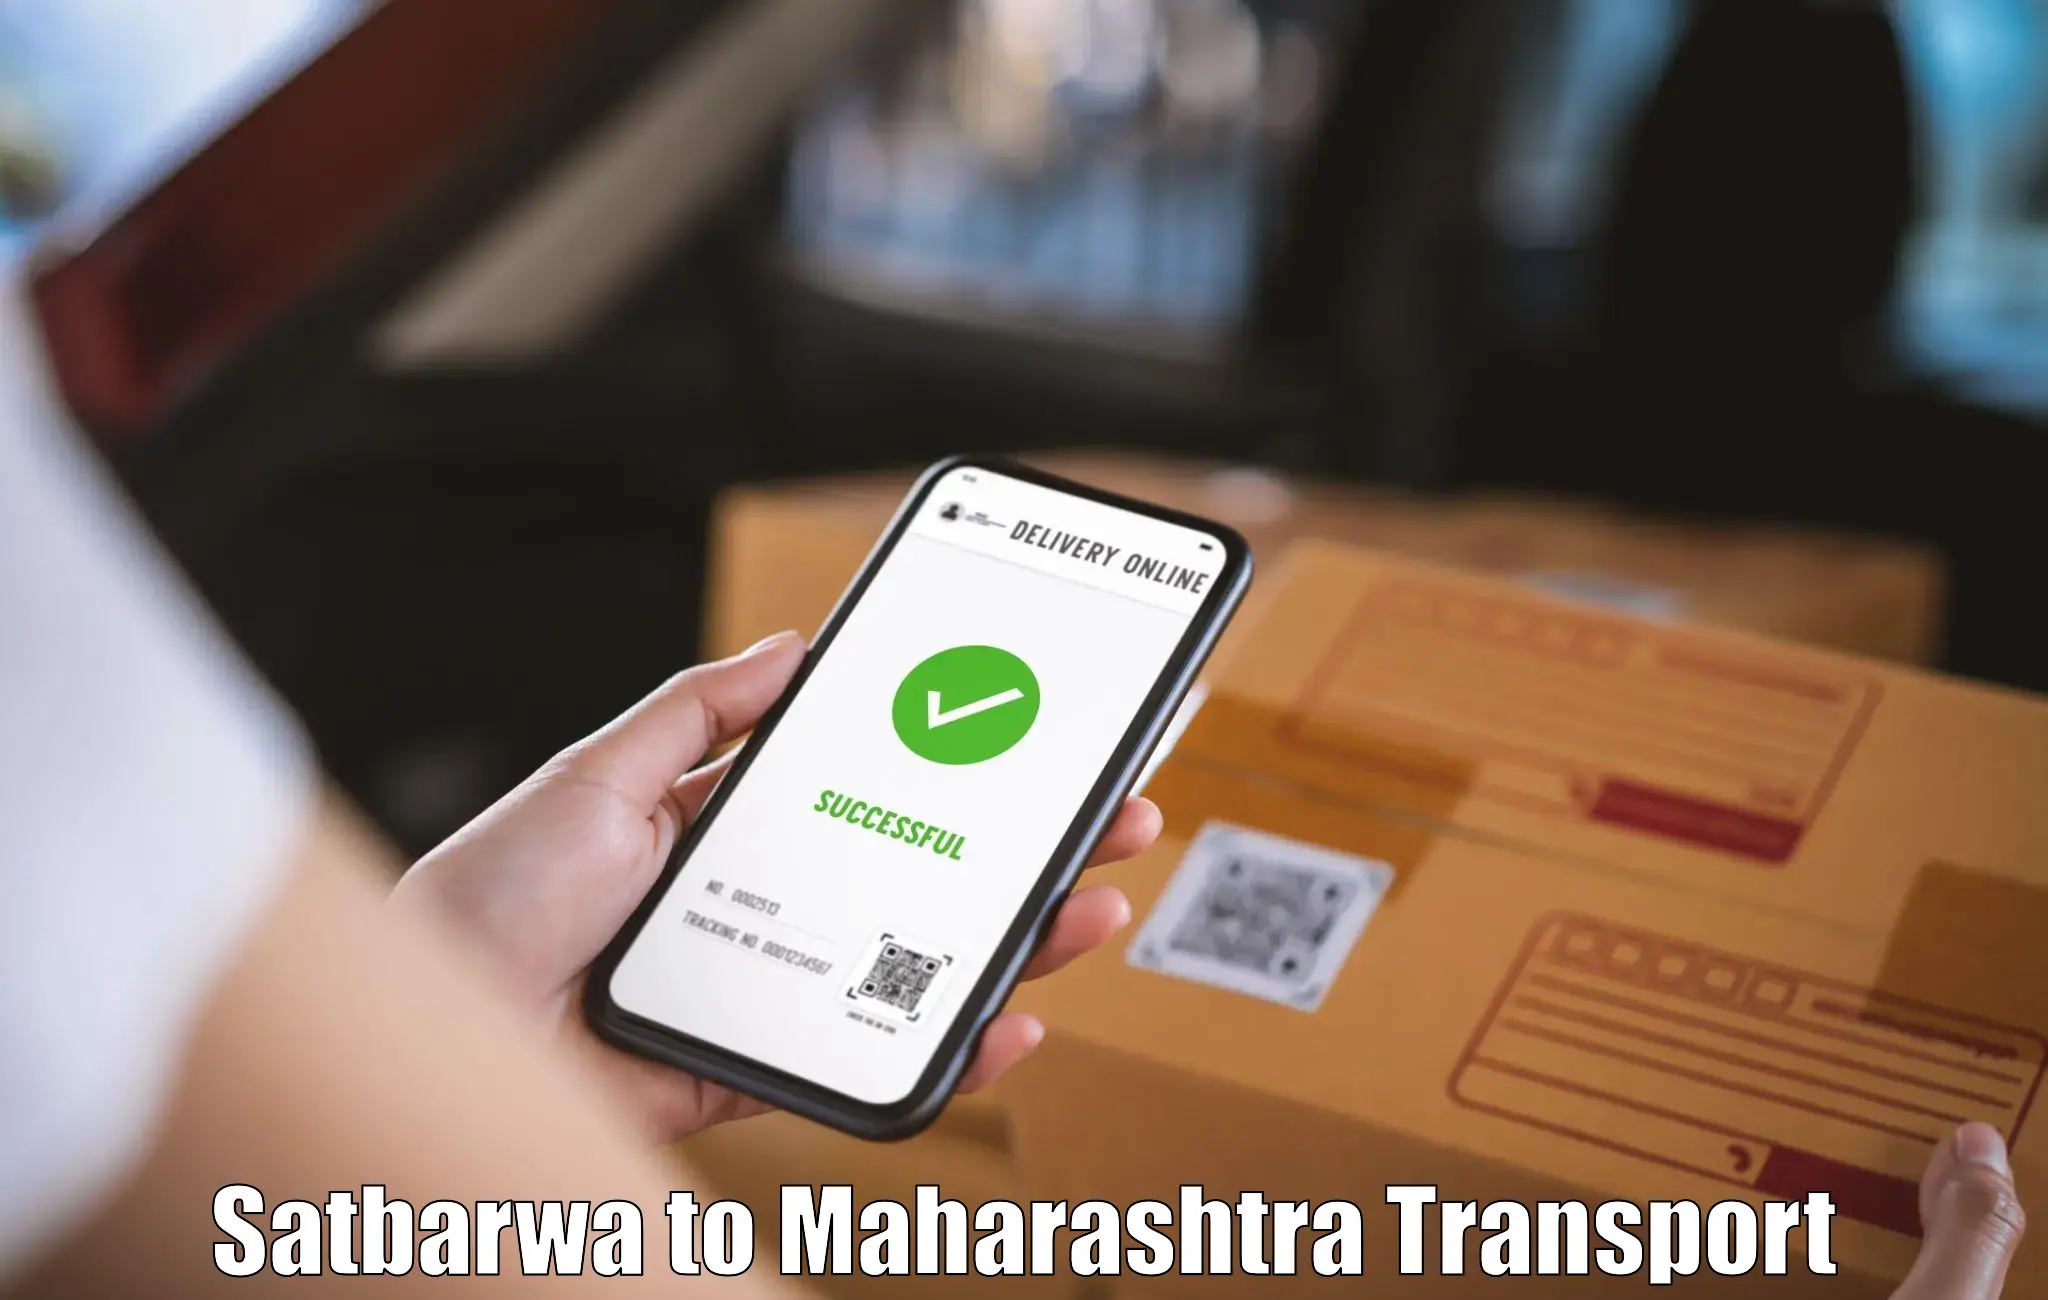 Air freight transport services Satbarwa to Loha Nanded